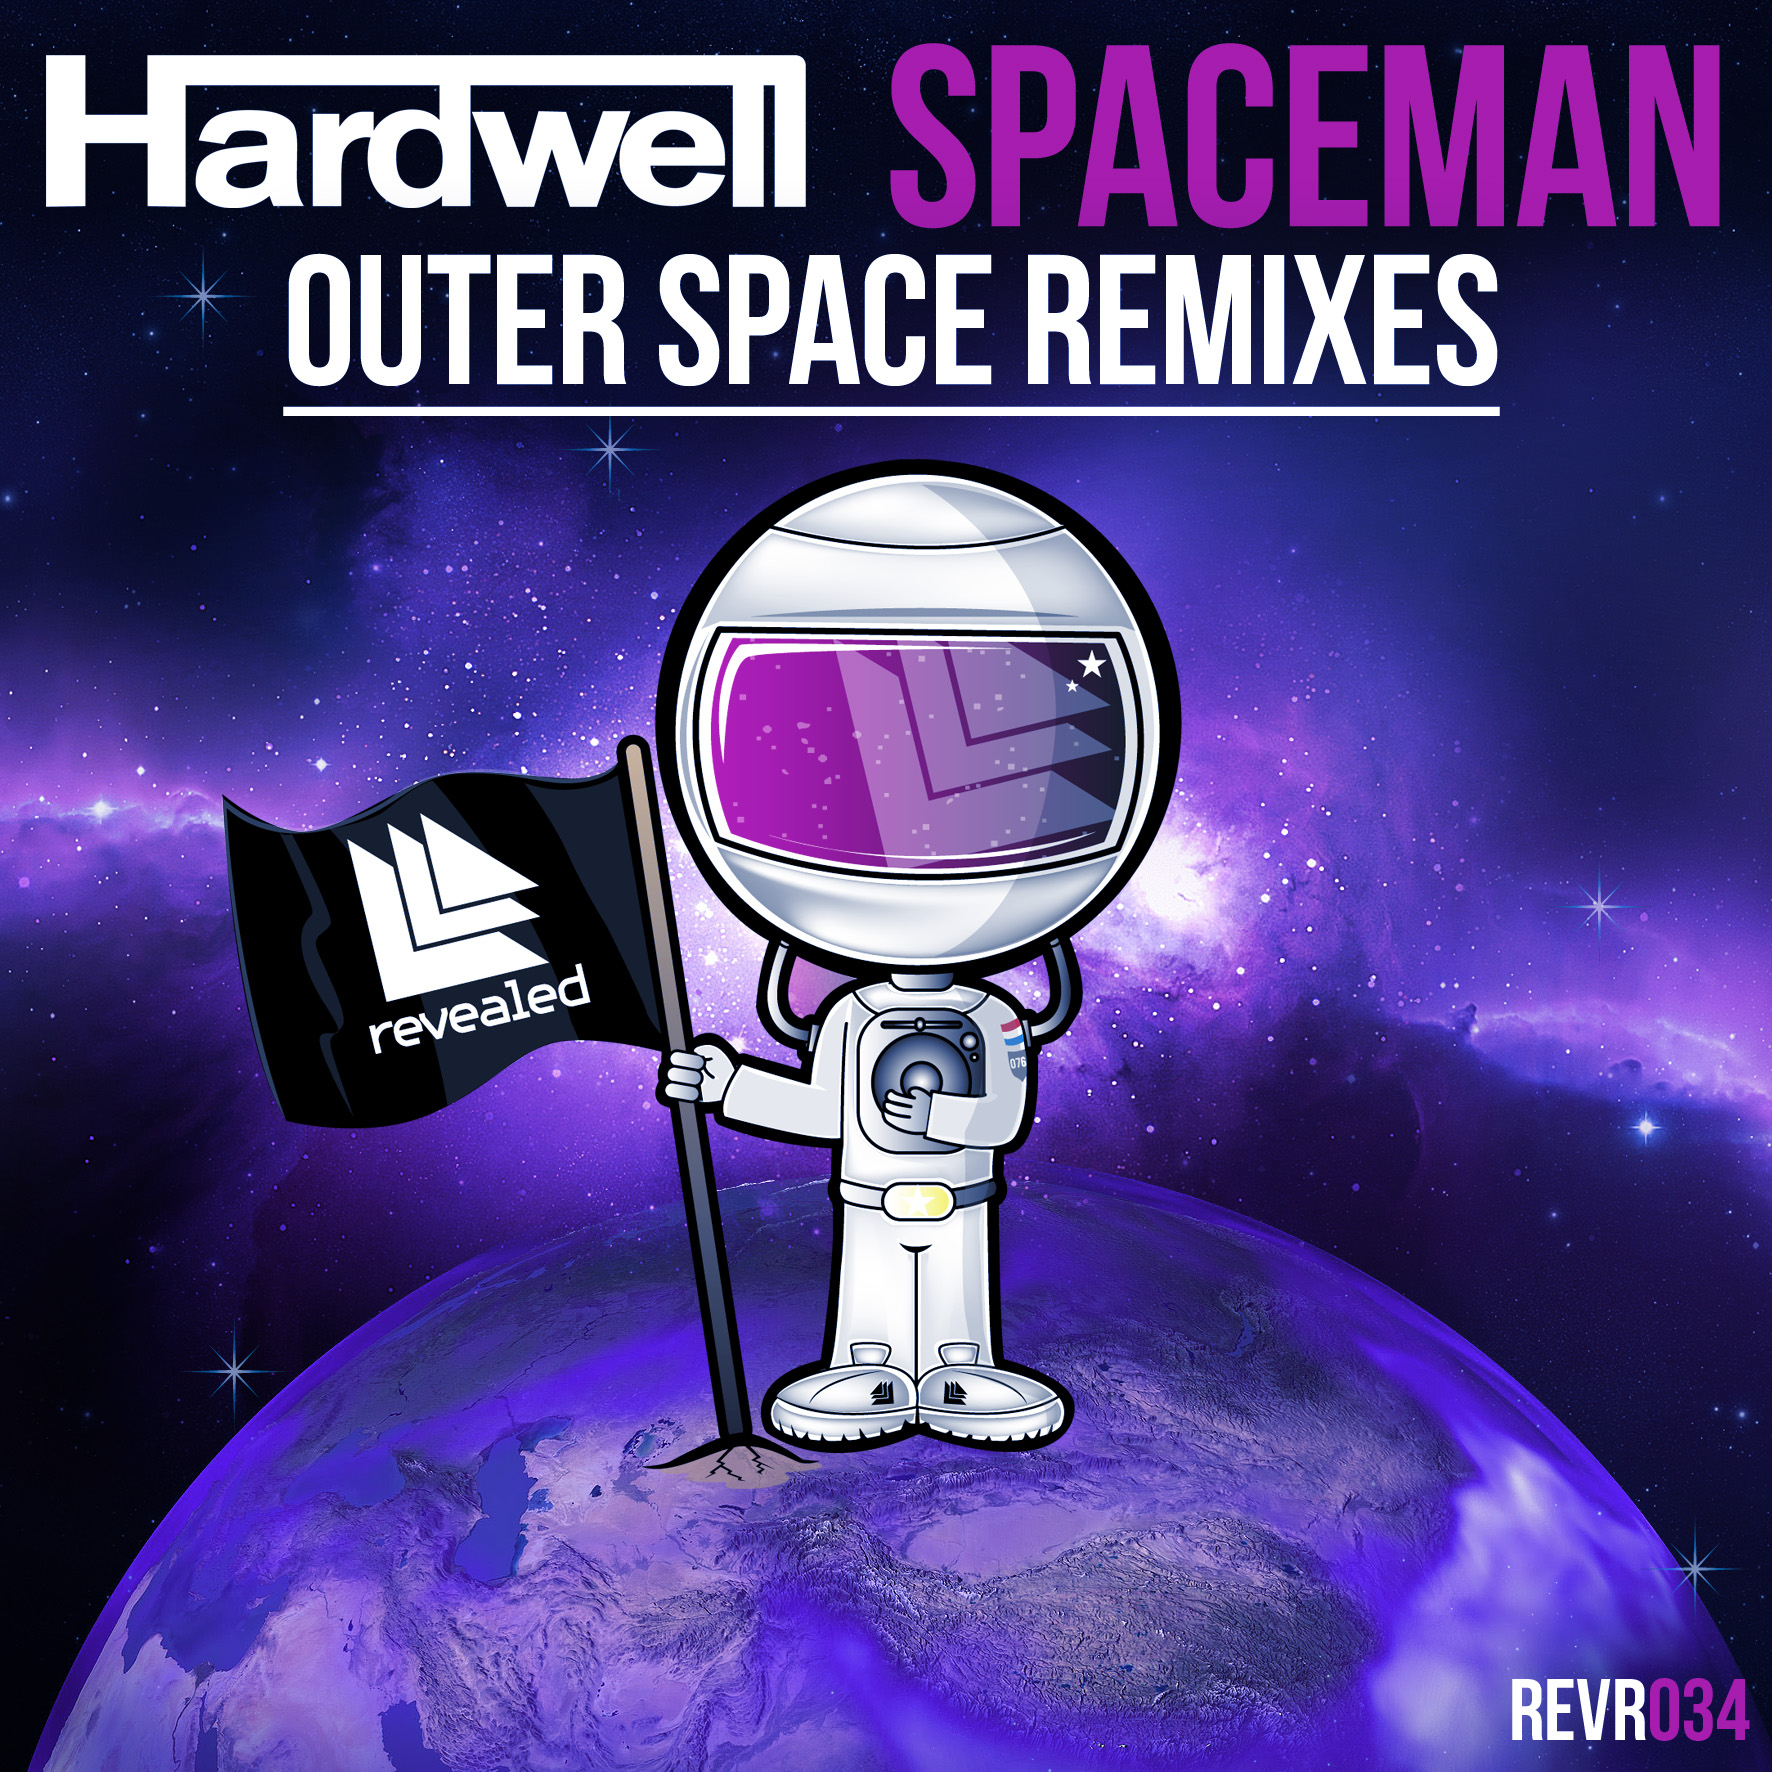 Hardwell – Spaceman (Outer Space Remixes) (Preview): Moombahton & Dubstep Remixes